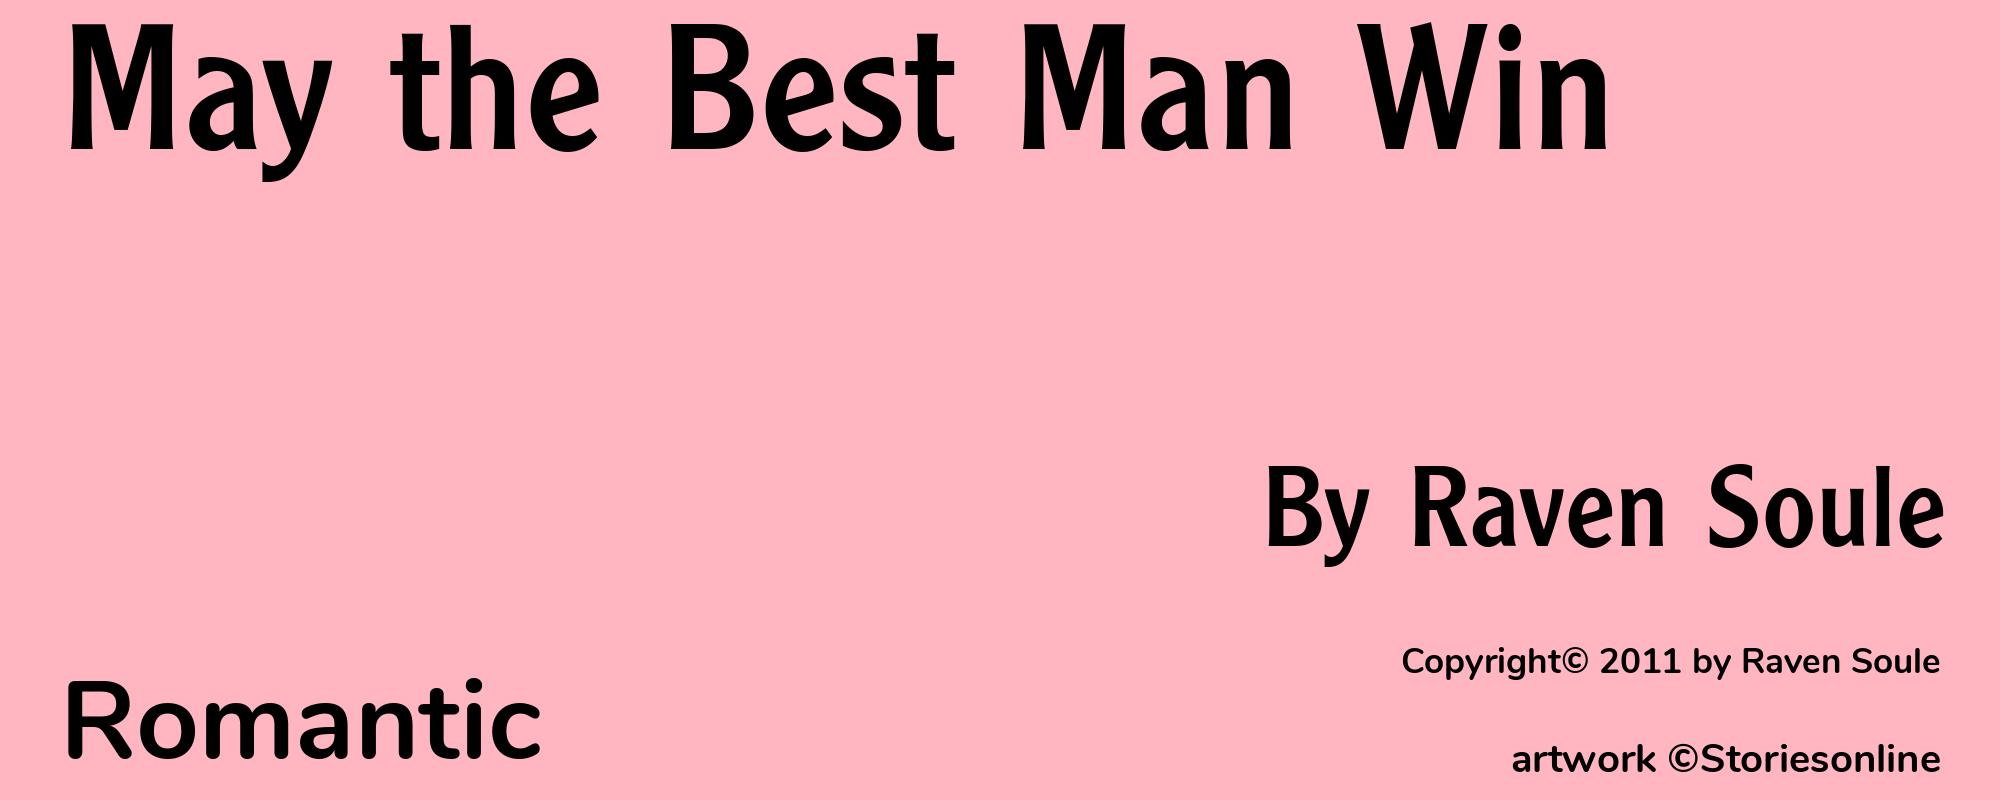 May the Best Man Win - Cover